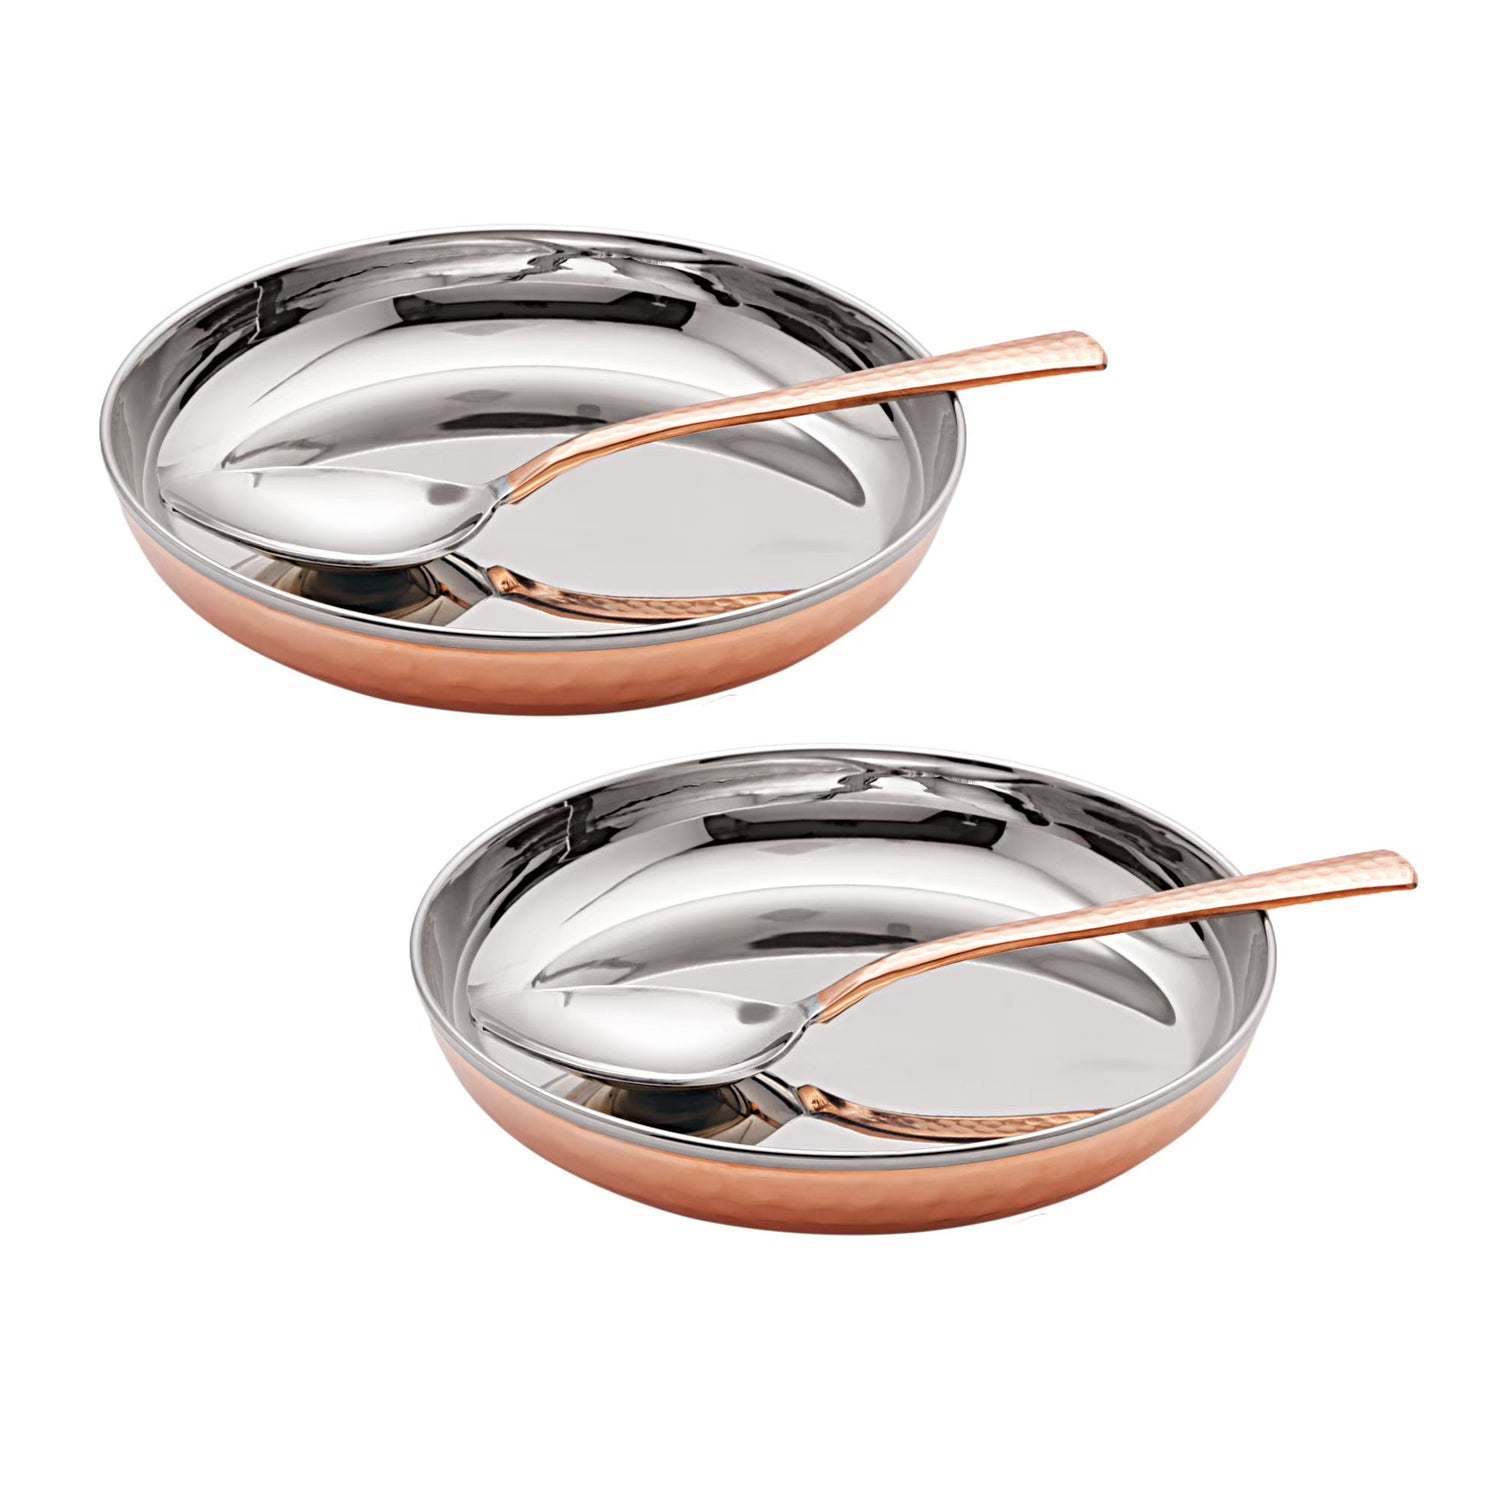 Pipal Rajwadi Steel Copper Snack Set (2 Dishes and 2 Spoons)